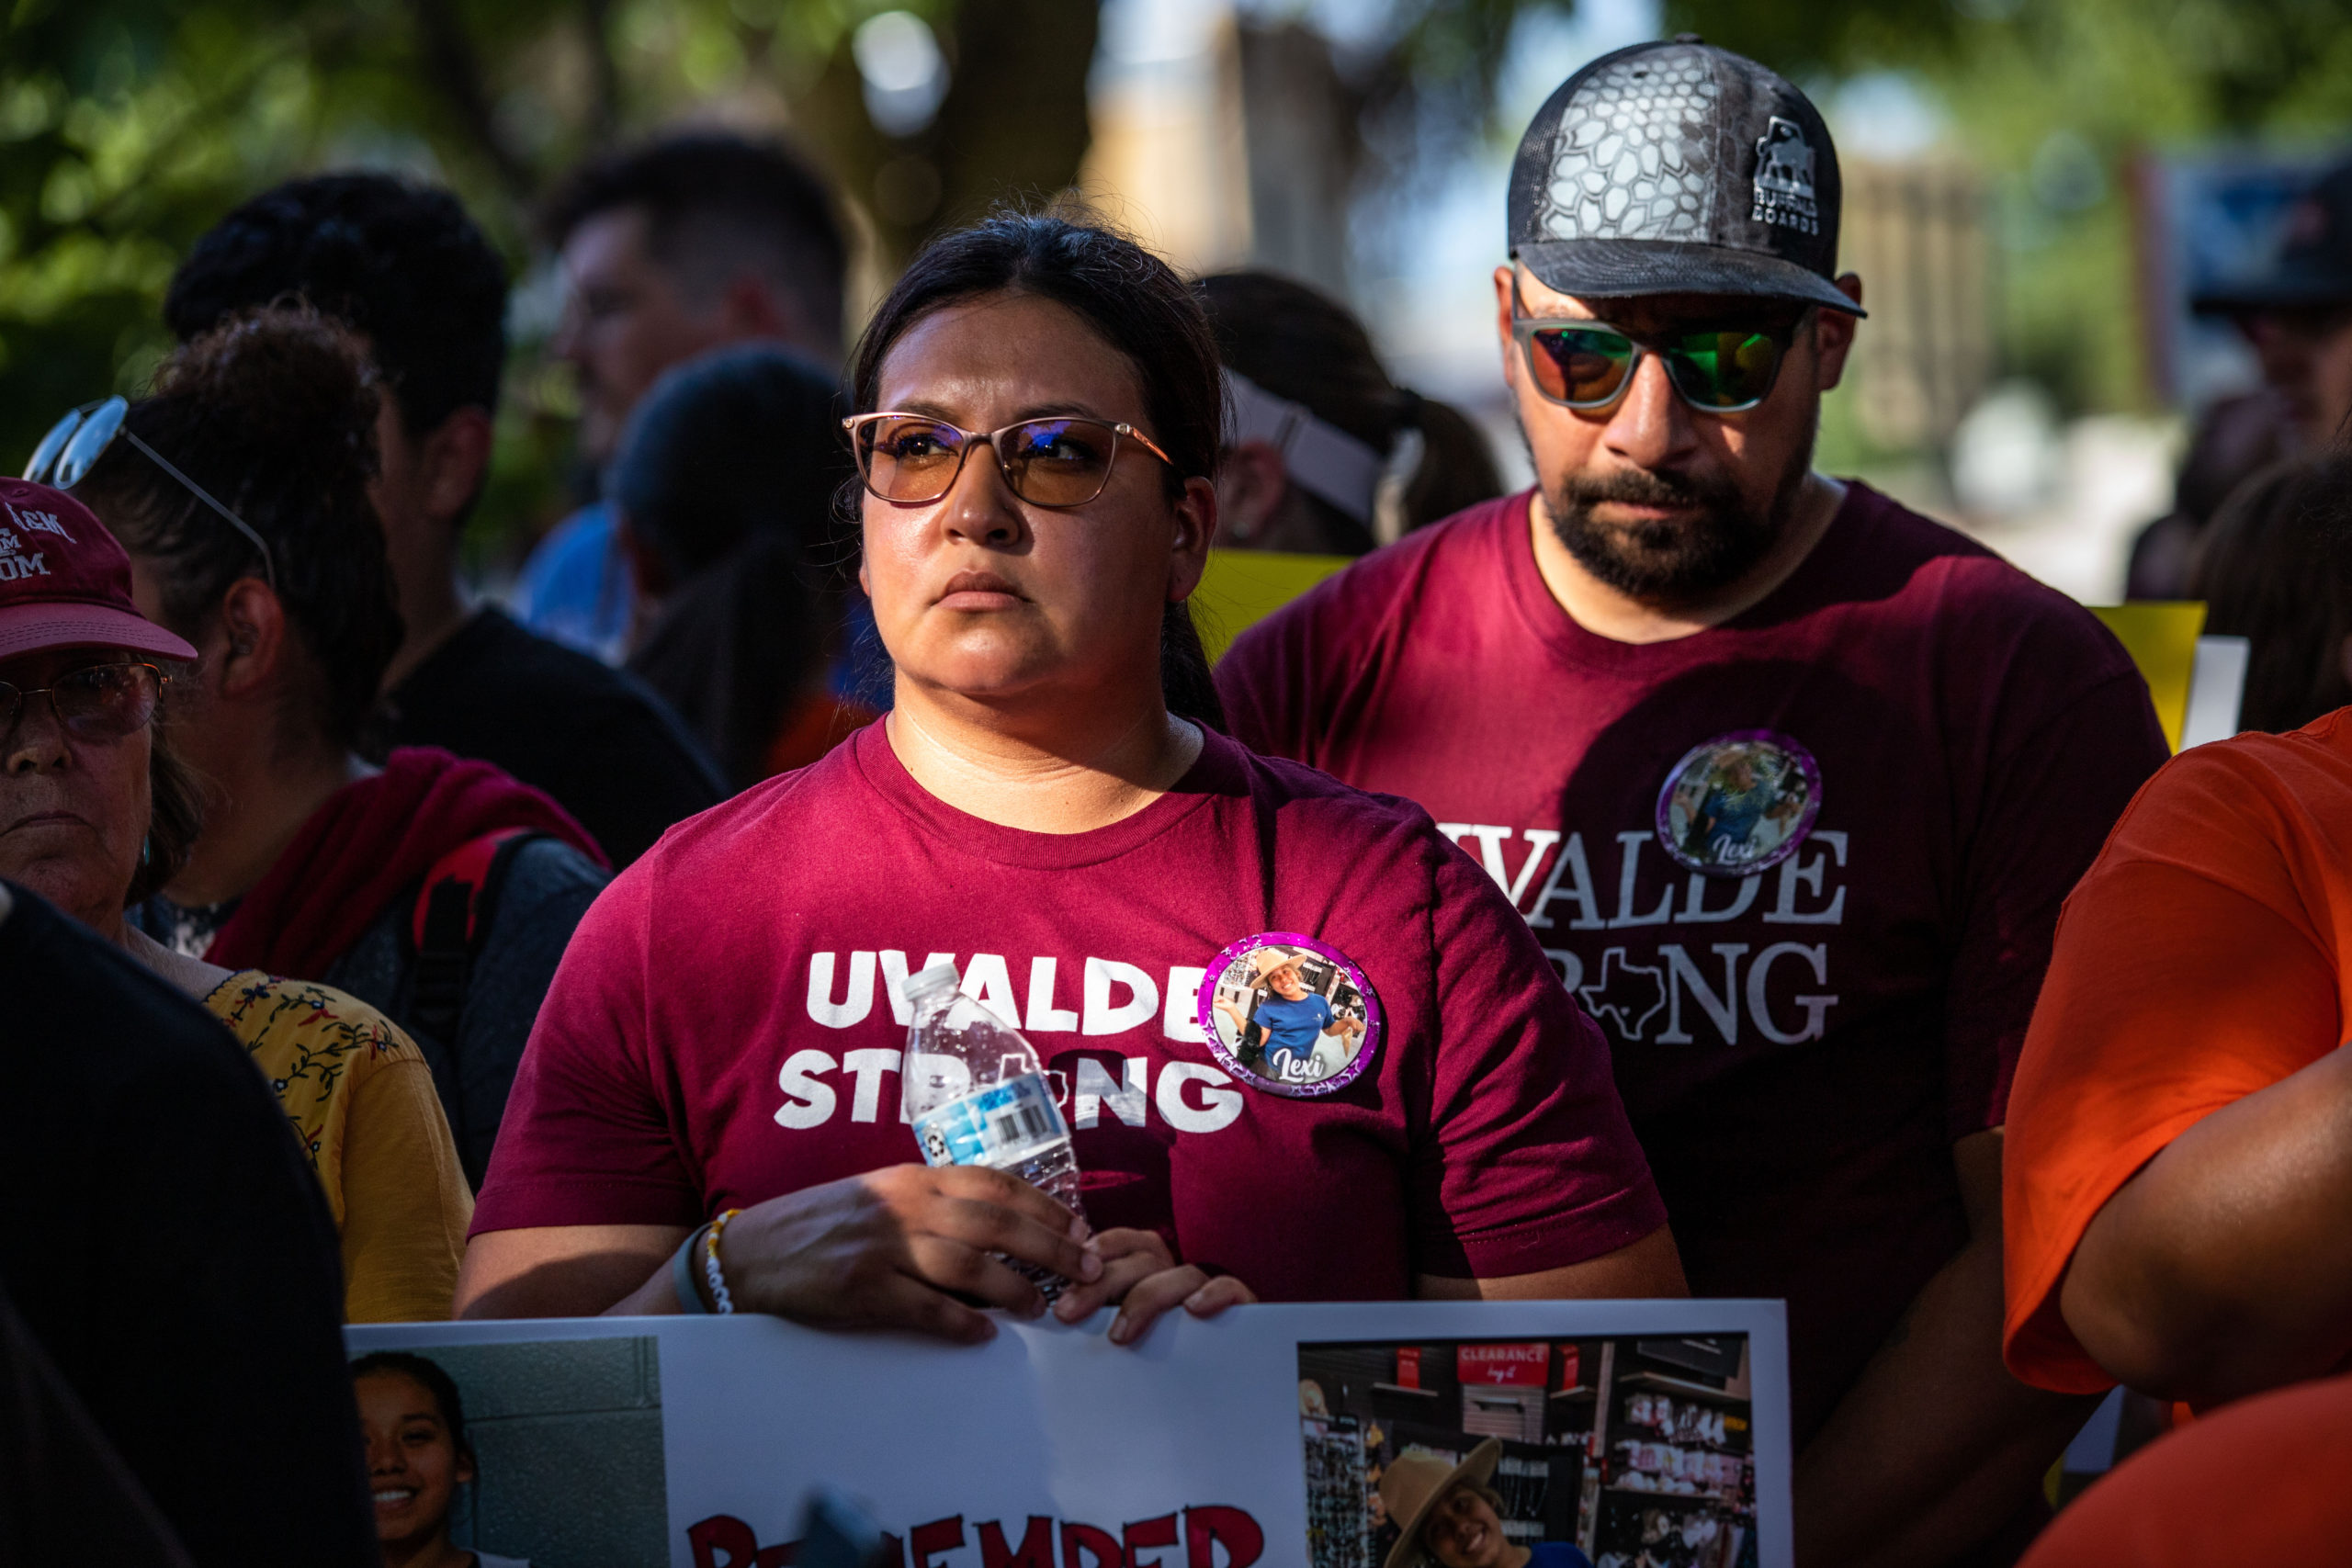 In a large crowd of people, a man and woman wear red Uvalde Strong t-shirt, their expressions sad.